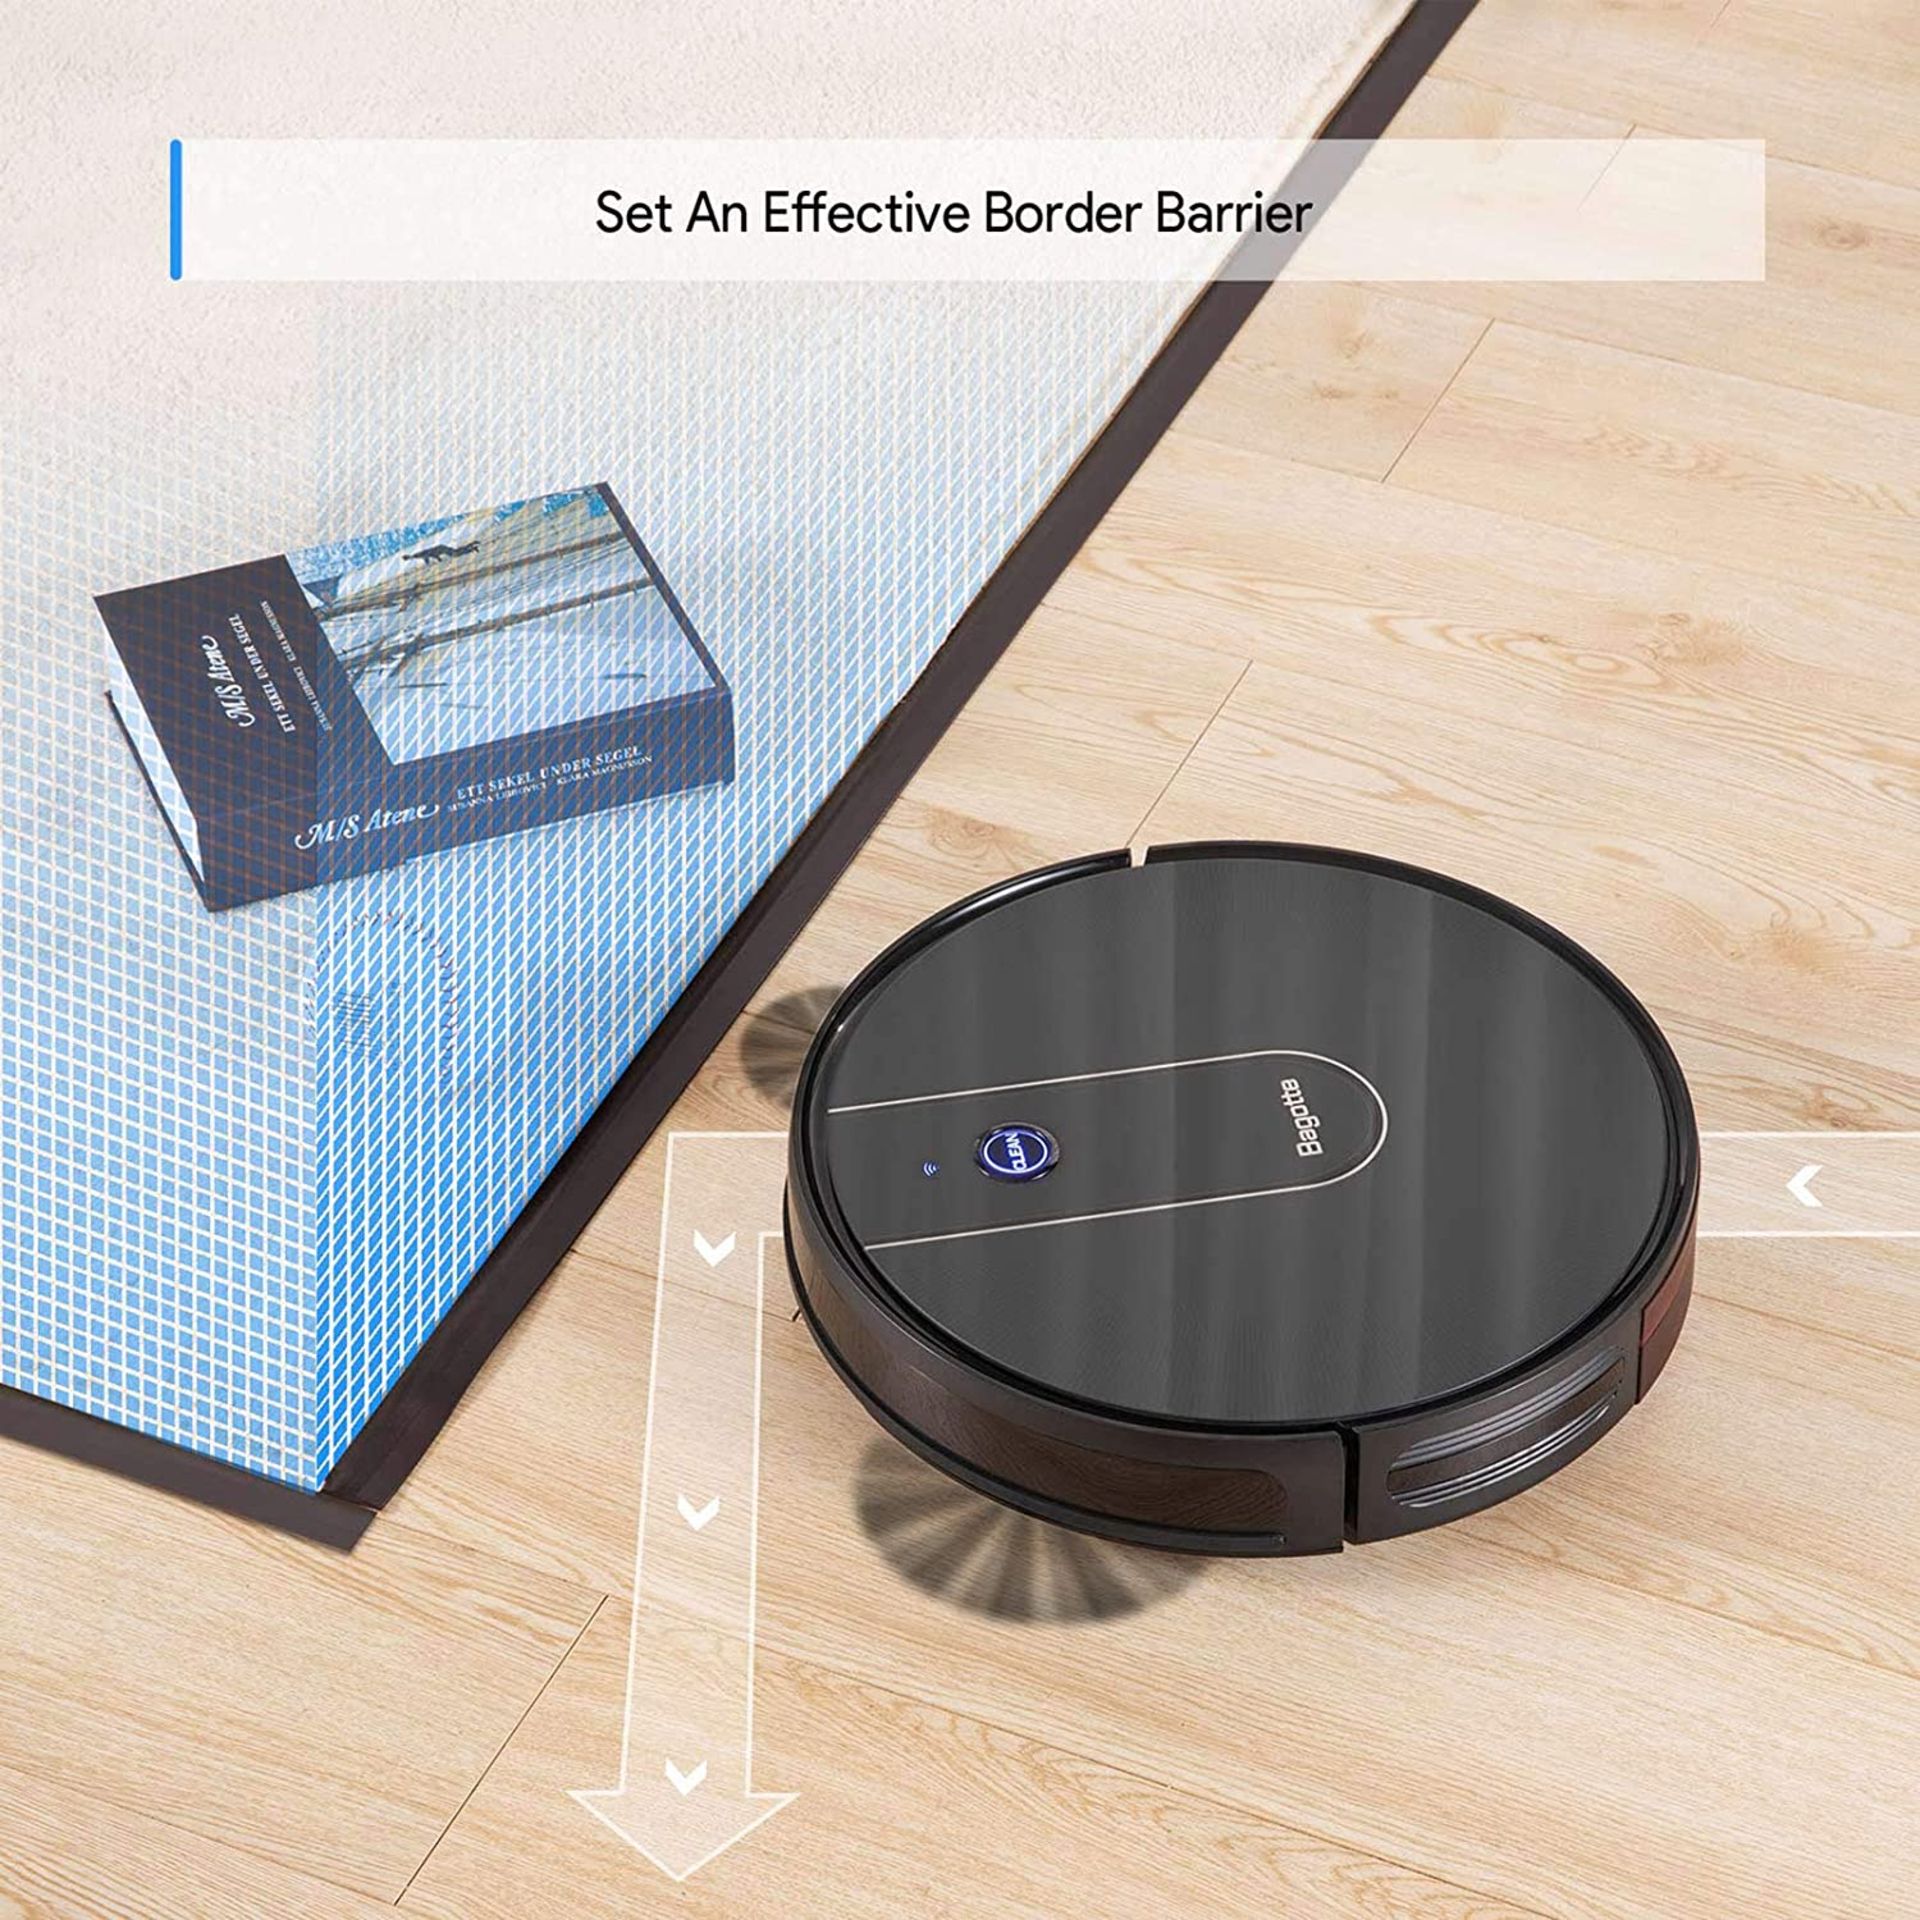 Bagotte BG700 Wi-Fi Robot Vacuum with mop - 2.7" Thin, Strong Suction, Work with Alexa - Image 4 of 8